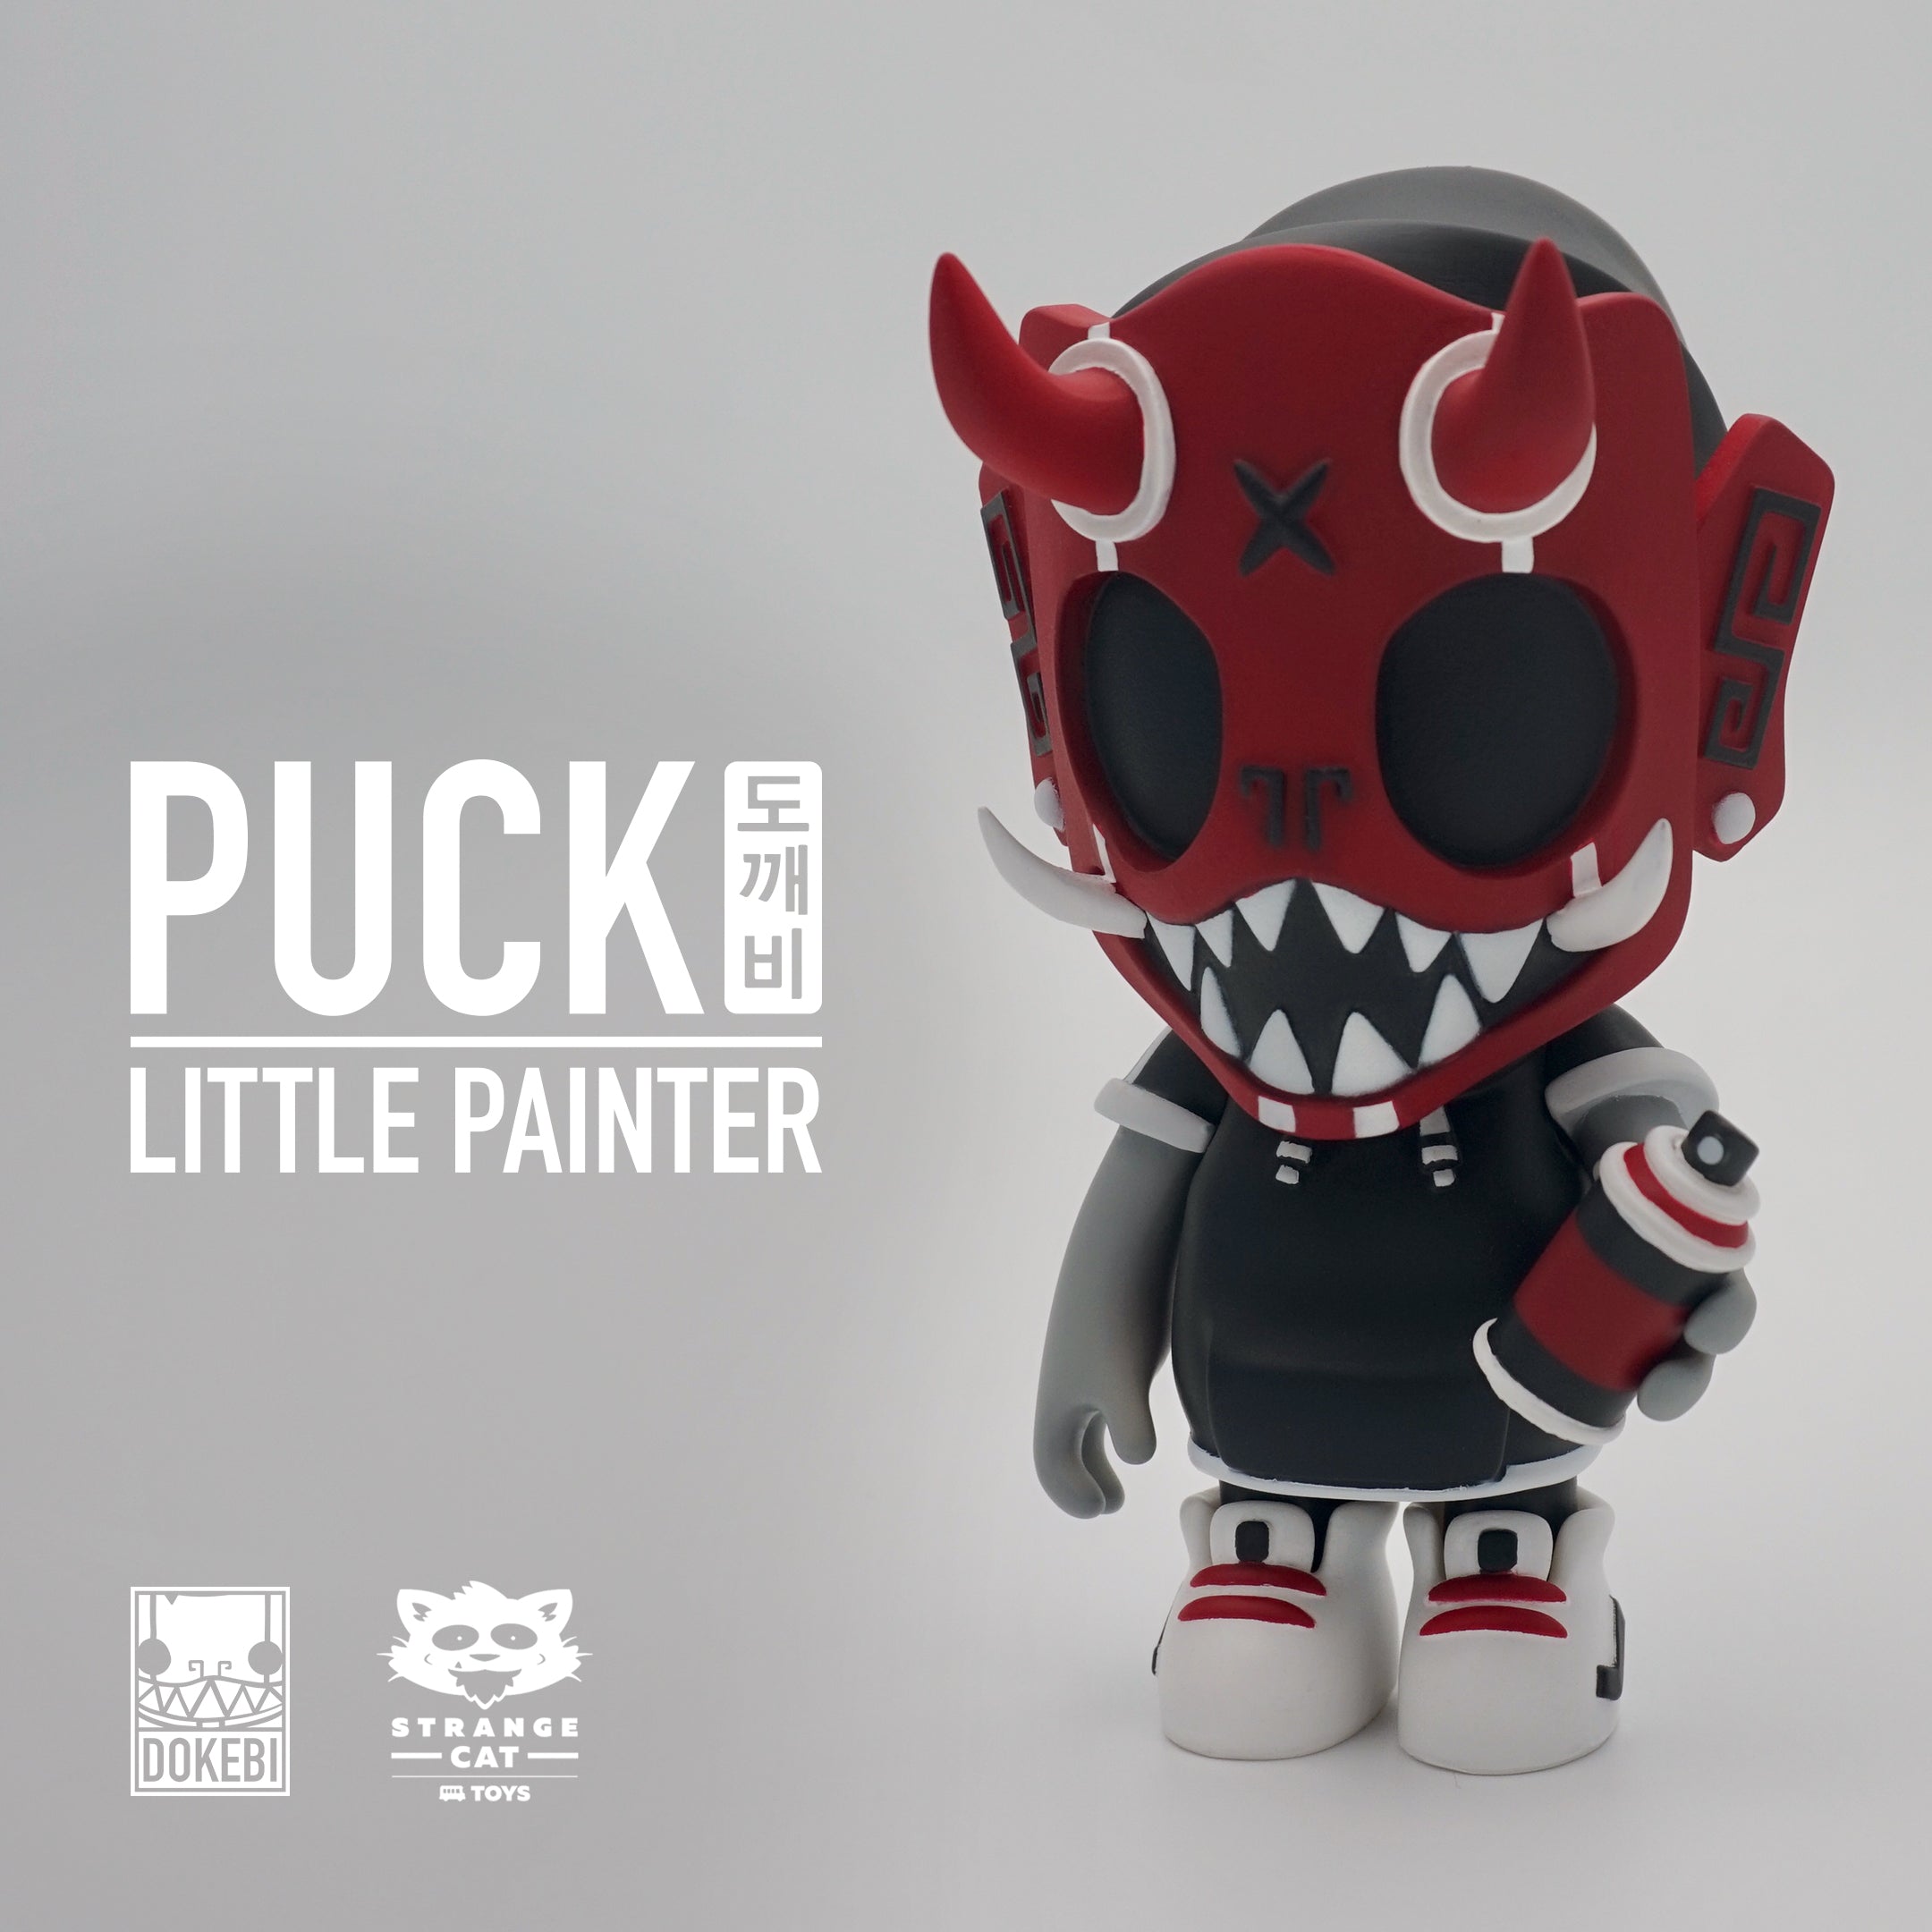 A toy figure with a red mask and white teeth, part of the Puck - Little Painter OG Red by Chris Dokebi collection.